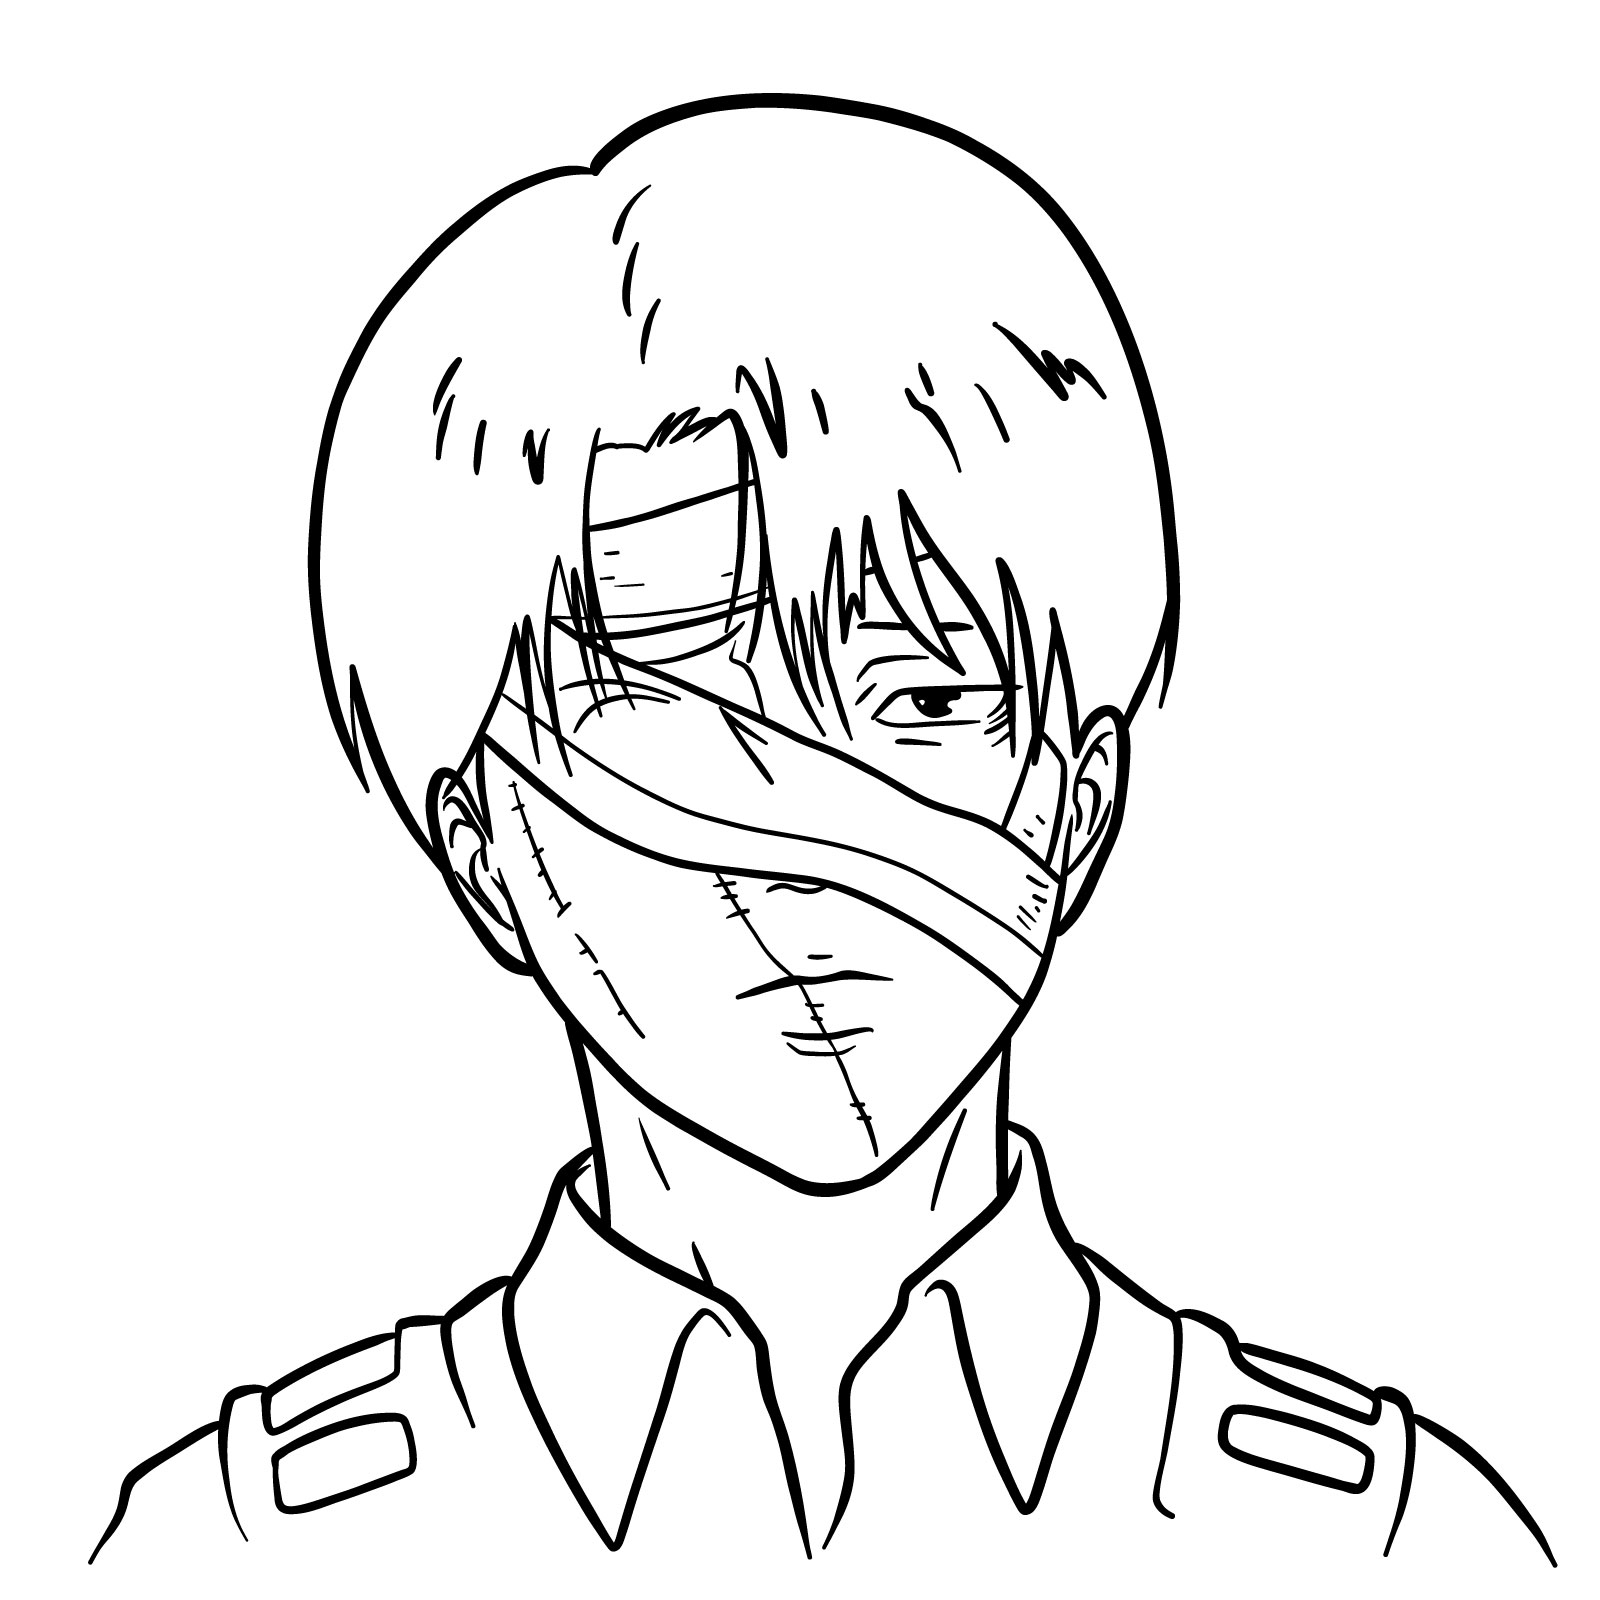 Easy drawing of the face of Levi with scars and bandages after the epilogue battle